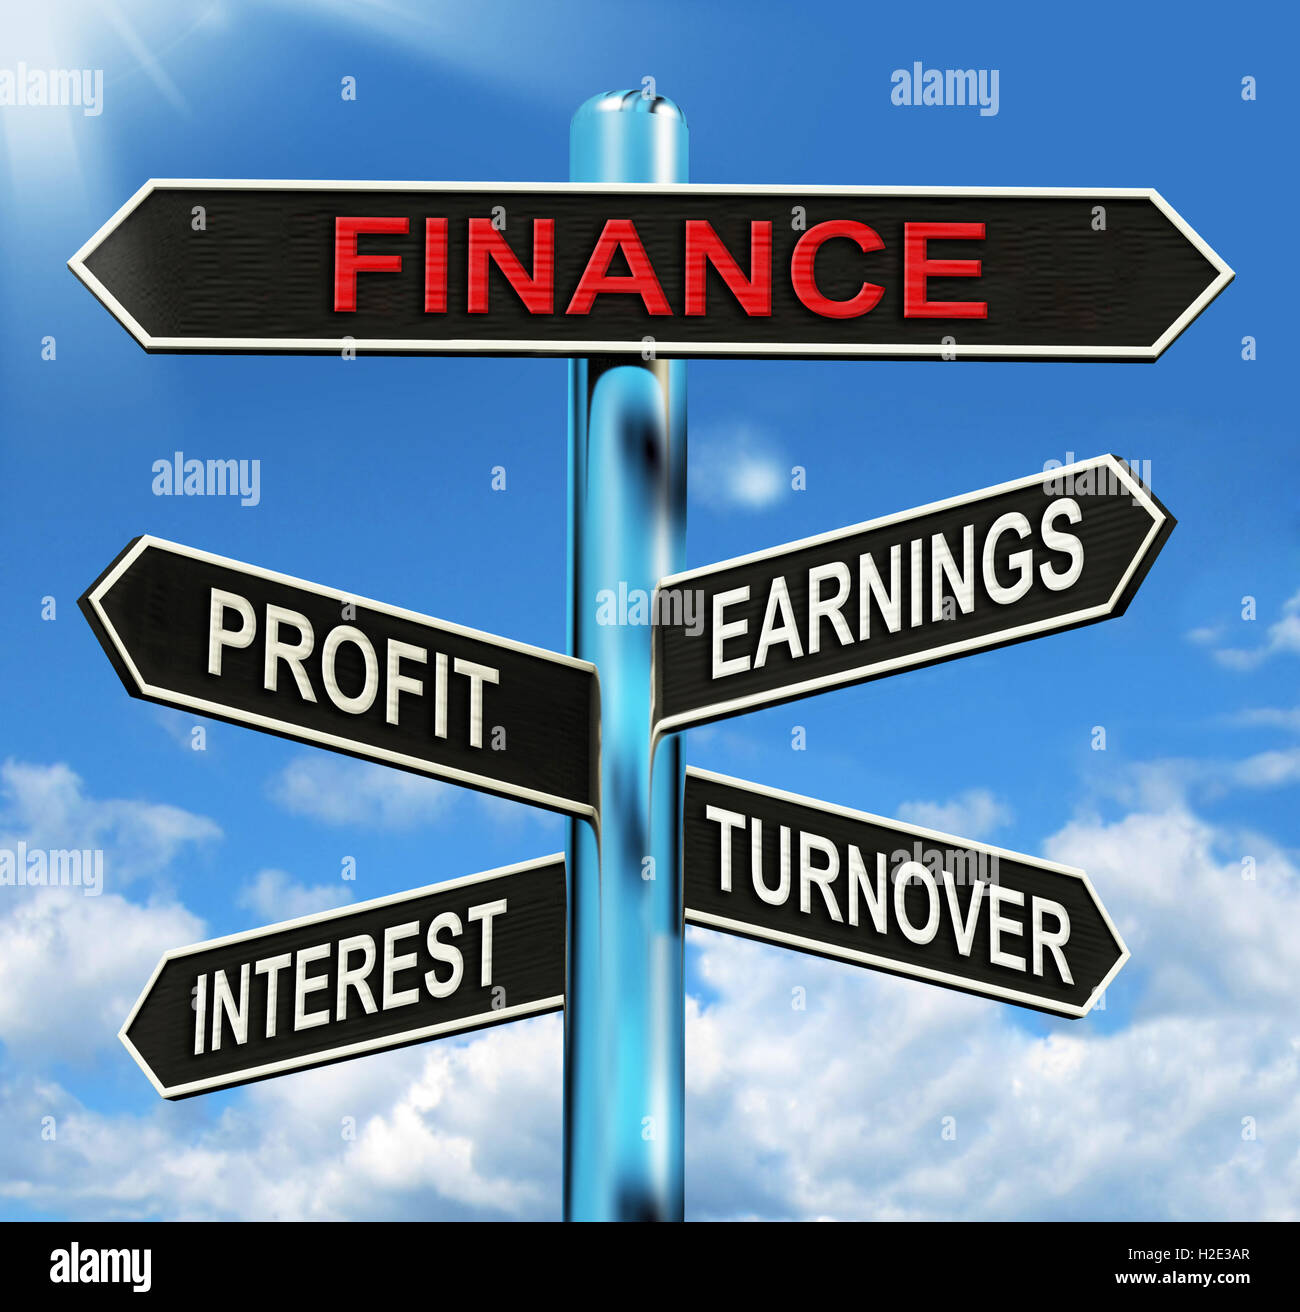 Finance Signpost Shows Profit Earnings Interest And Turnover Stock Photo